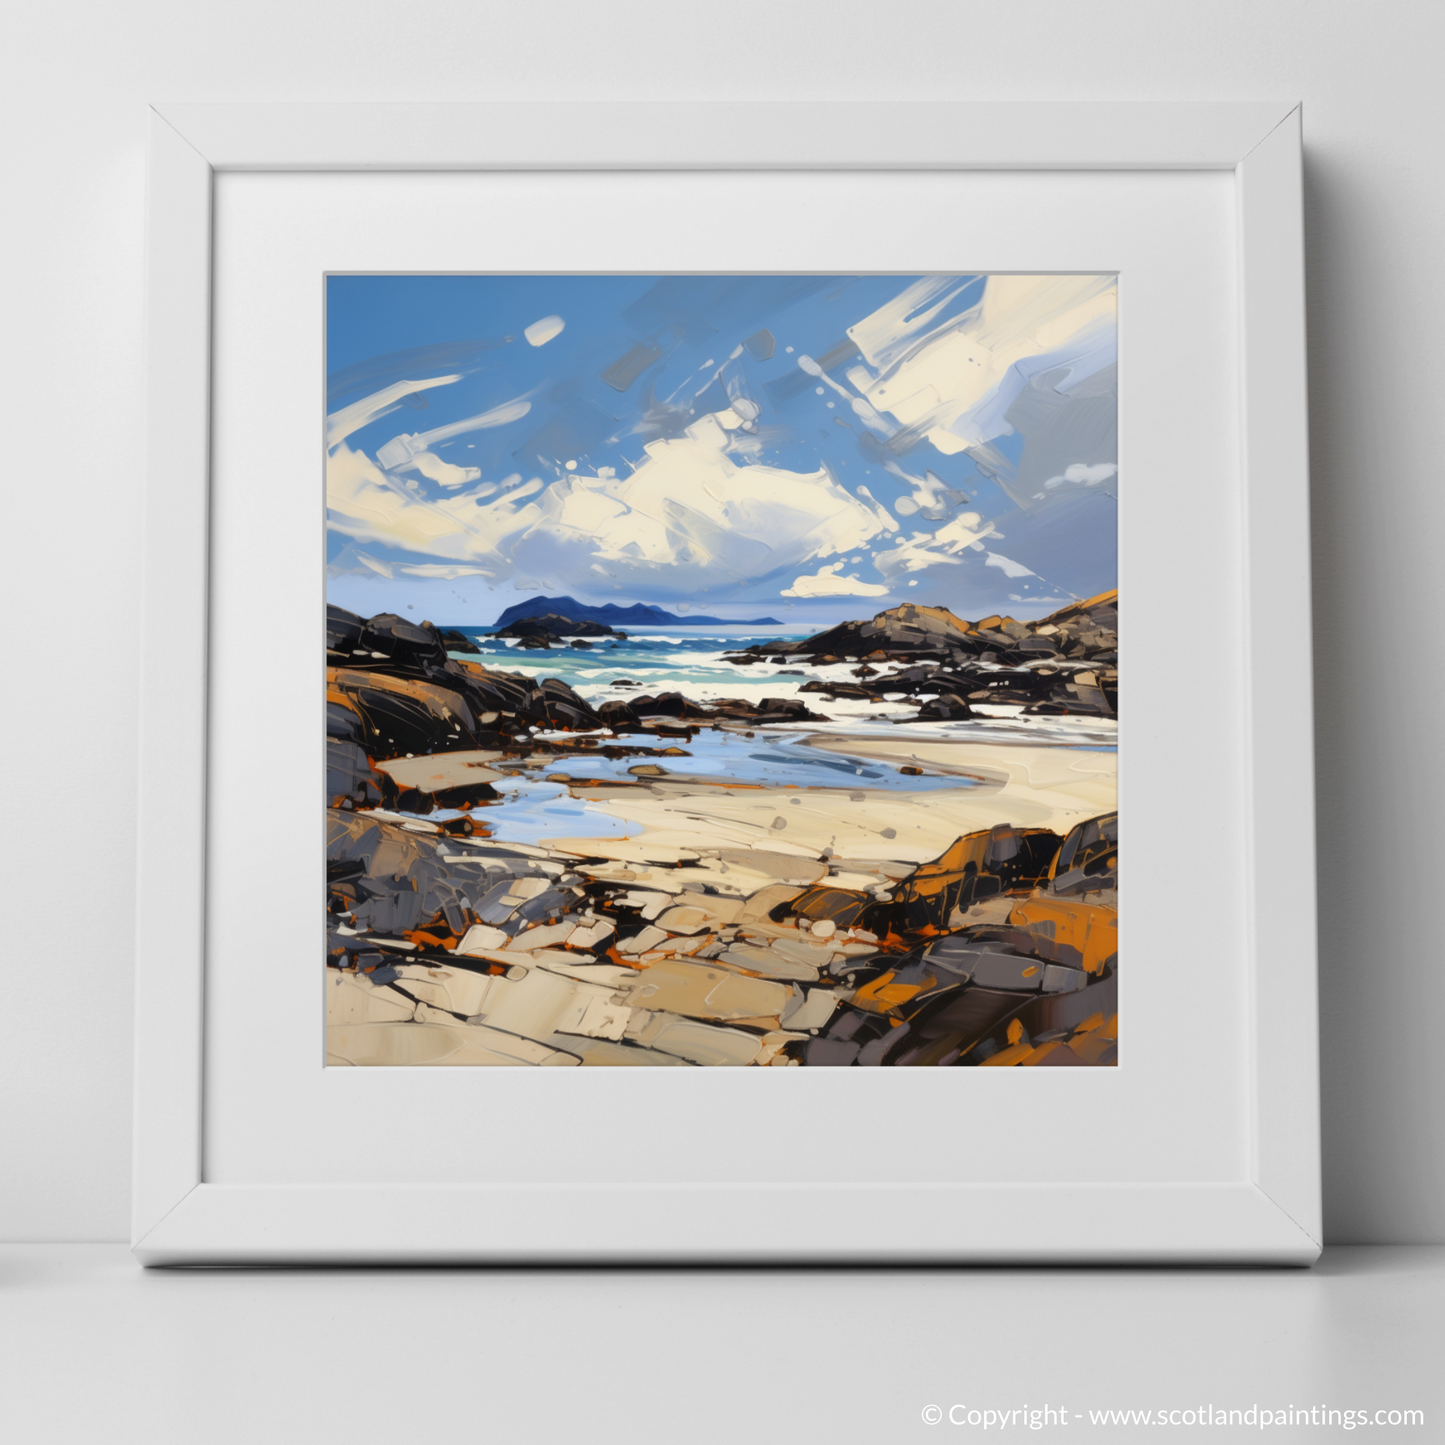 Art Print of Isle of Harris, Outer Hebrides with a white frame